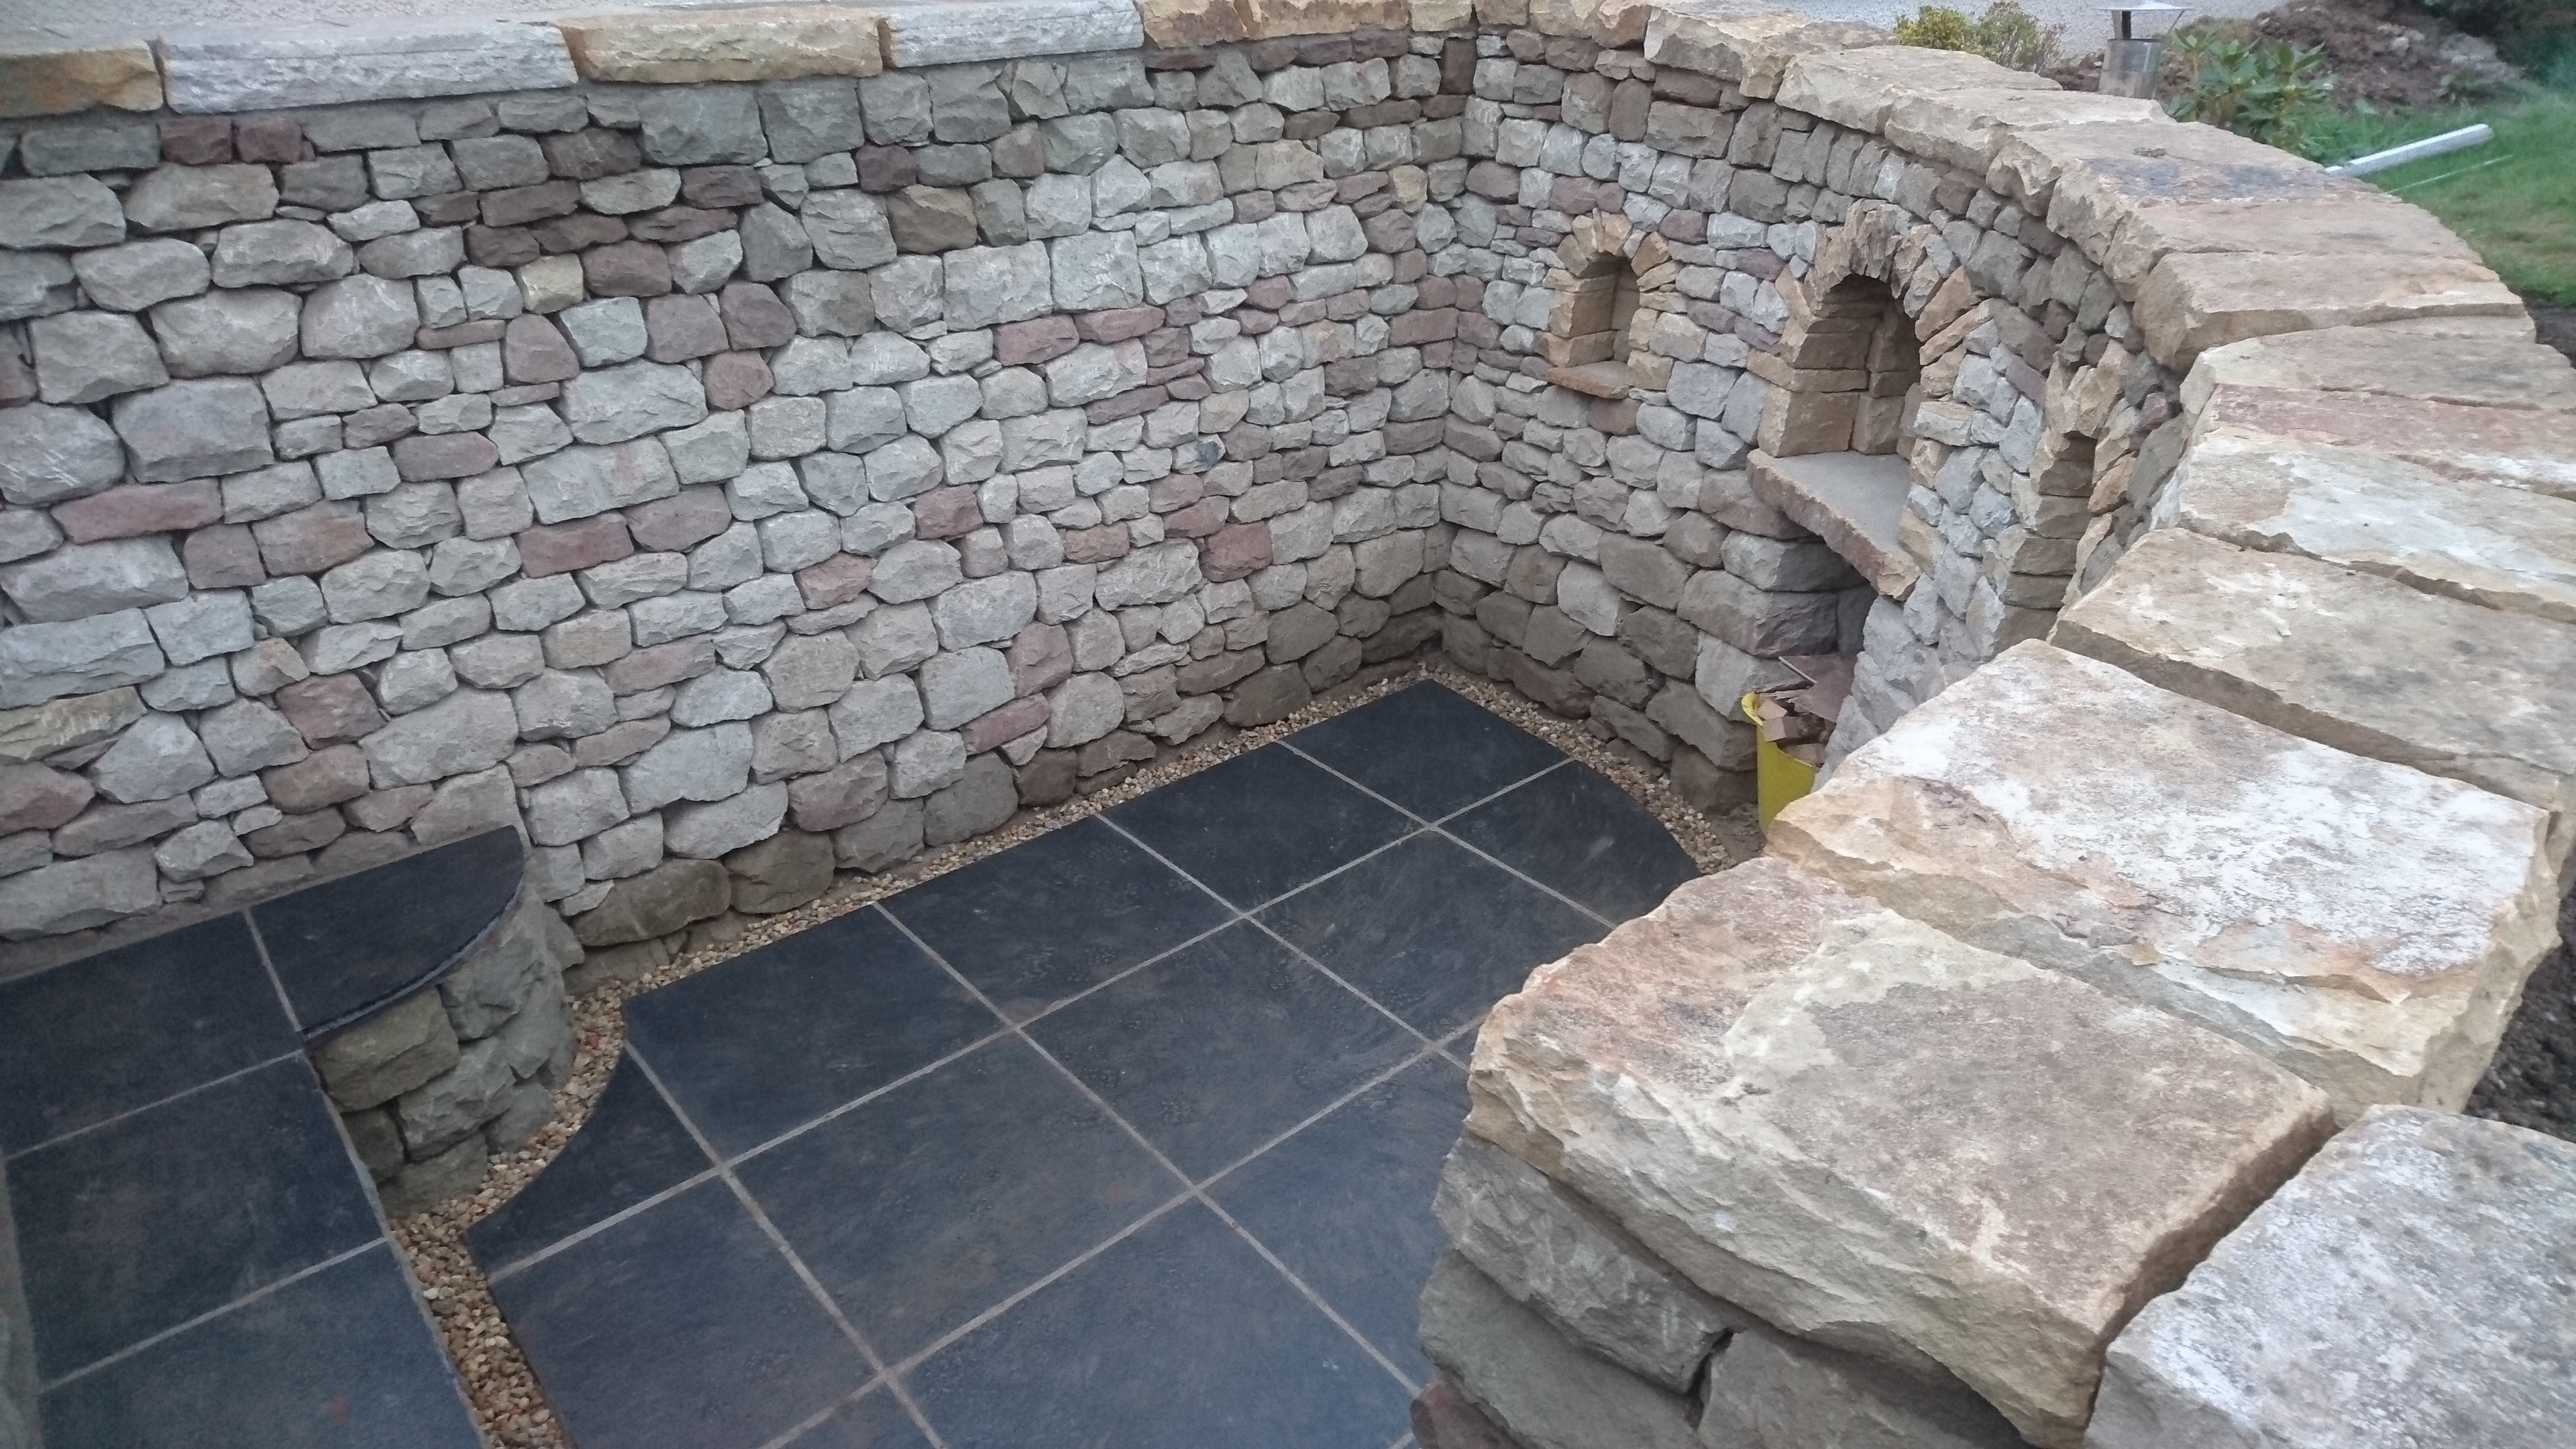 Dry stone seating space and pizza oven